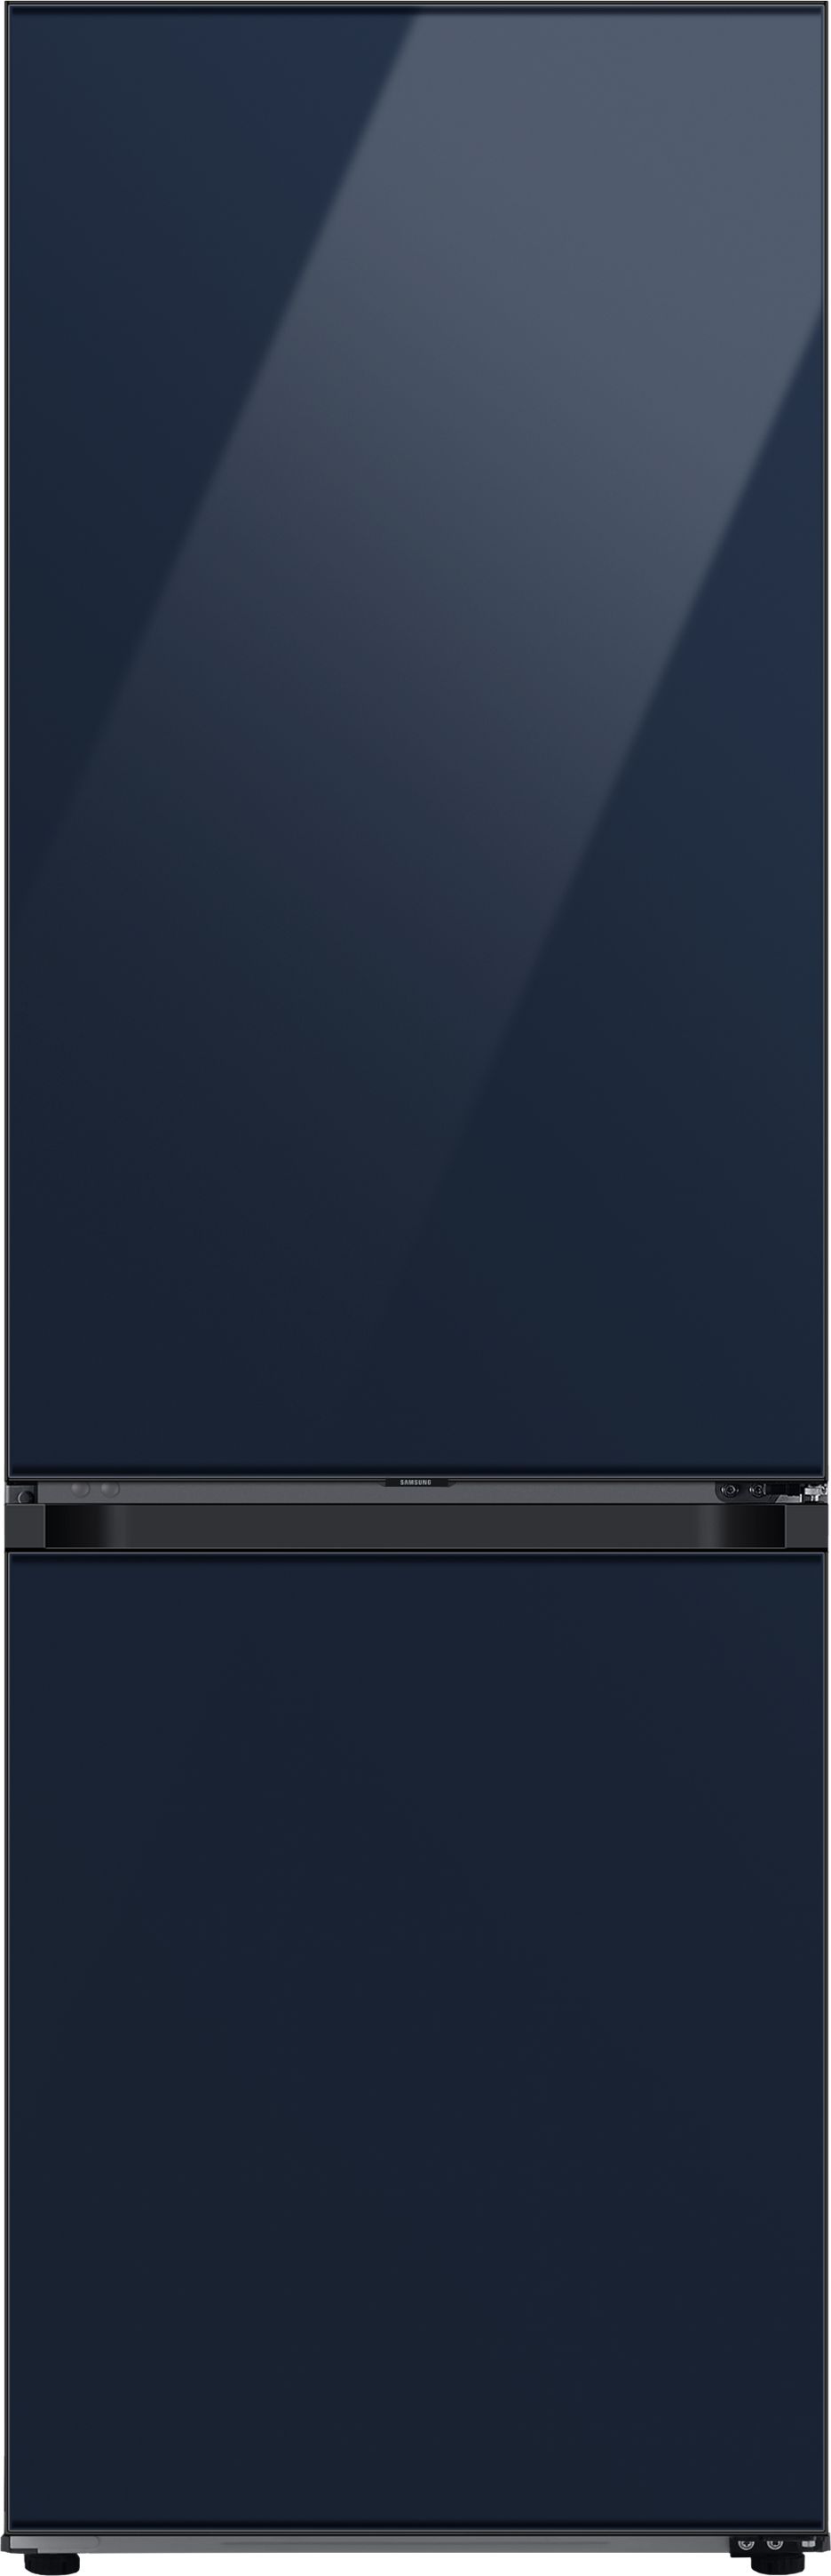 Samsung Bespoke Series 4 RB34C6B2E41 Wifi Connected 70/30 No Frost Fridge Freezer - Glam Navy - E Rated, Blue